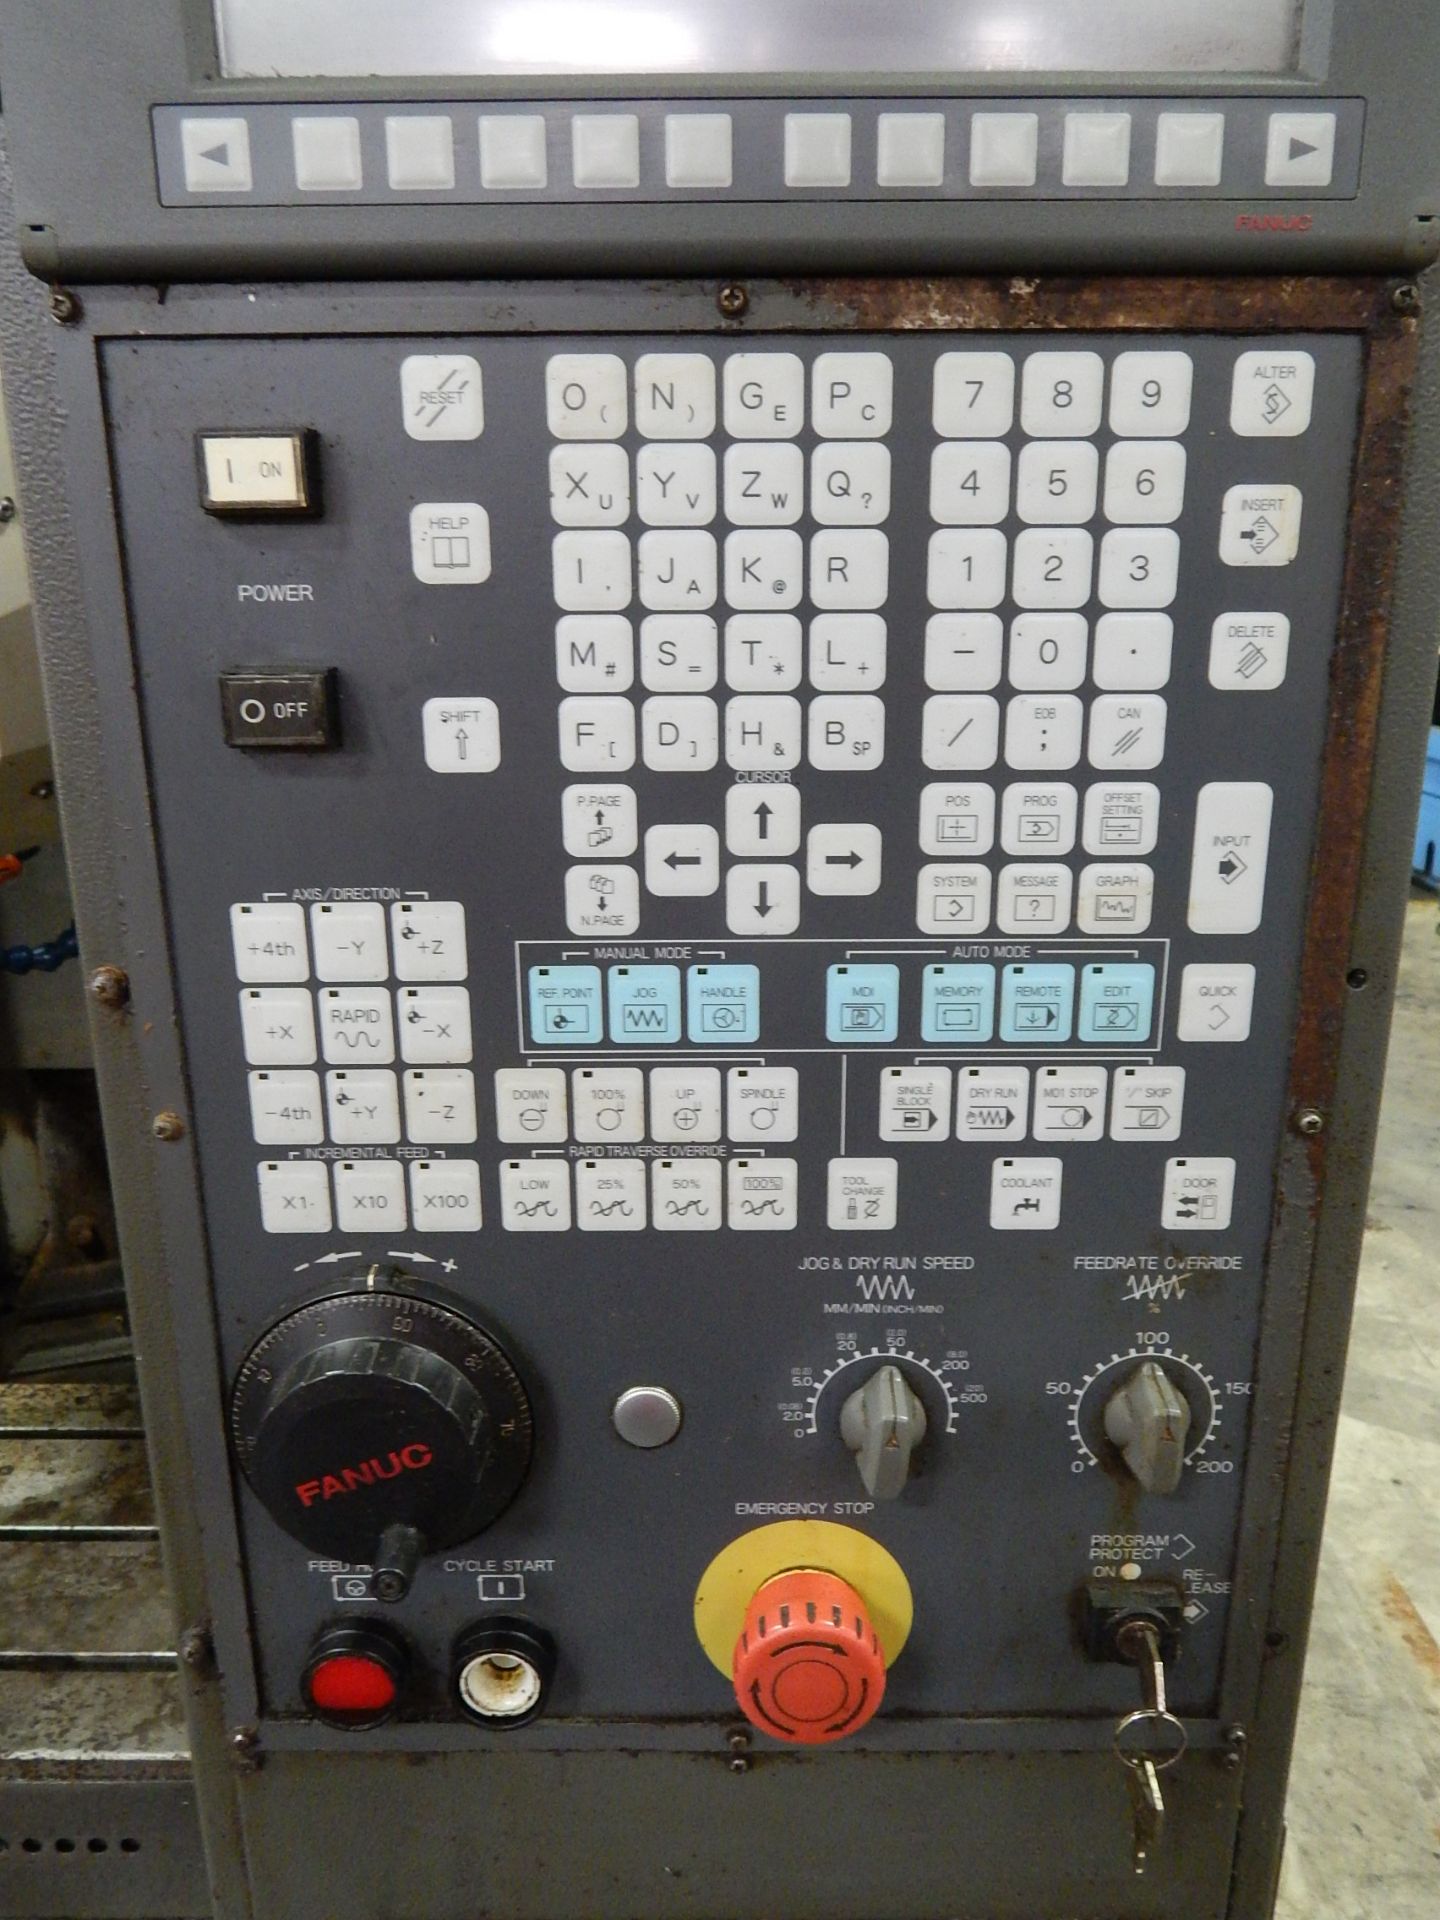 Fanuc Robodrill Mate CNC Drilling and Tapping Machine, s/n P06YN096, New 2006, Fanuc 0-MC CNC - Image 4 of 8